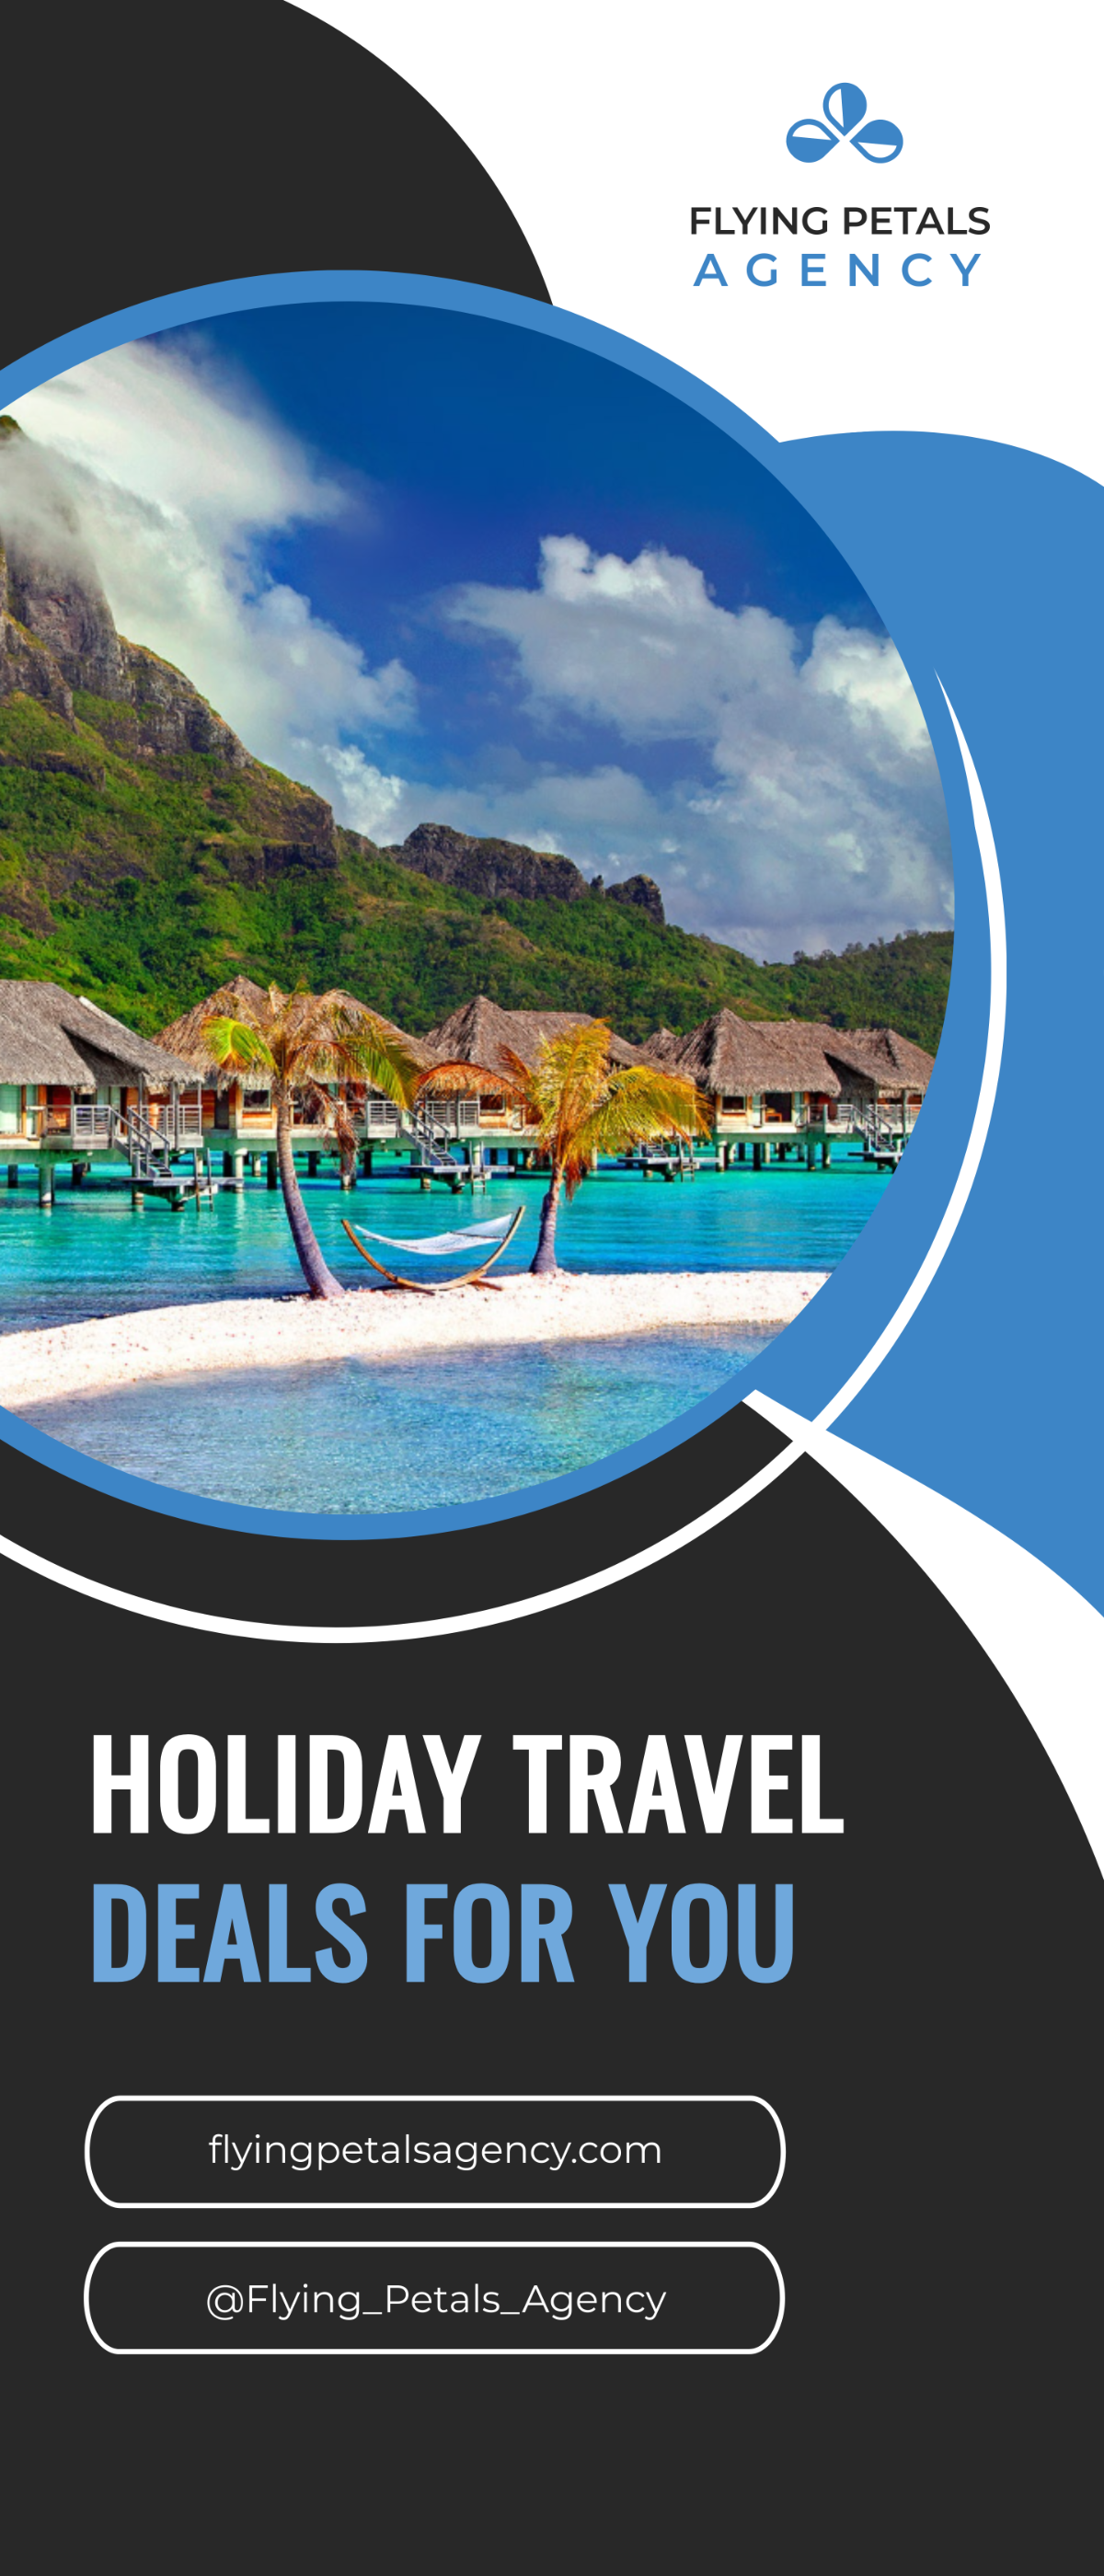 Free Holiday Travel Roll Up Banner Template